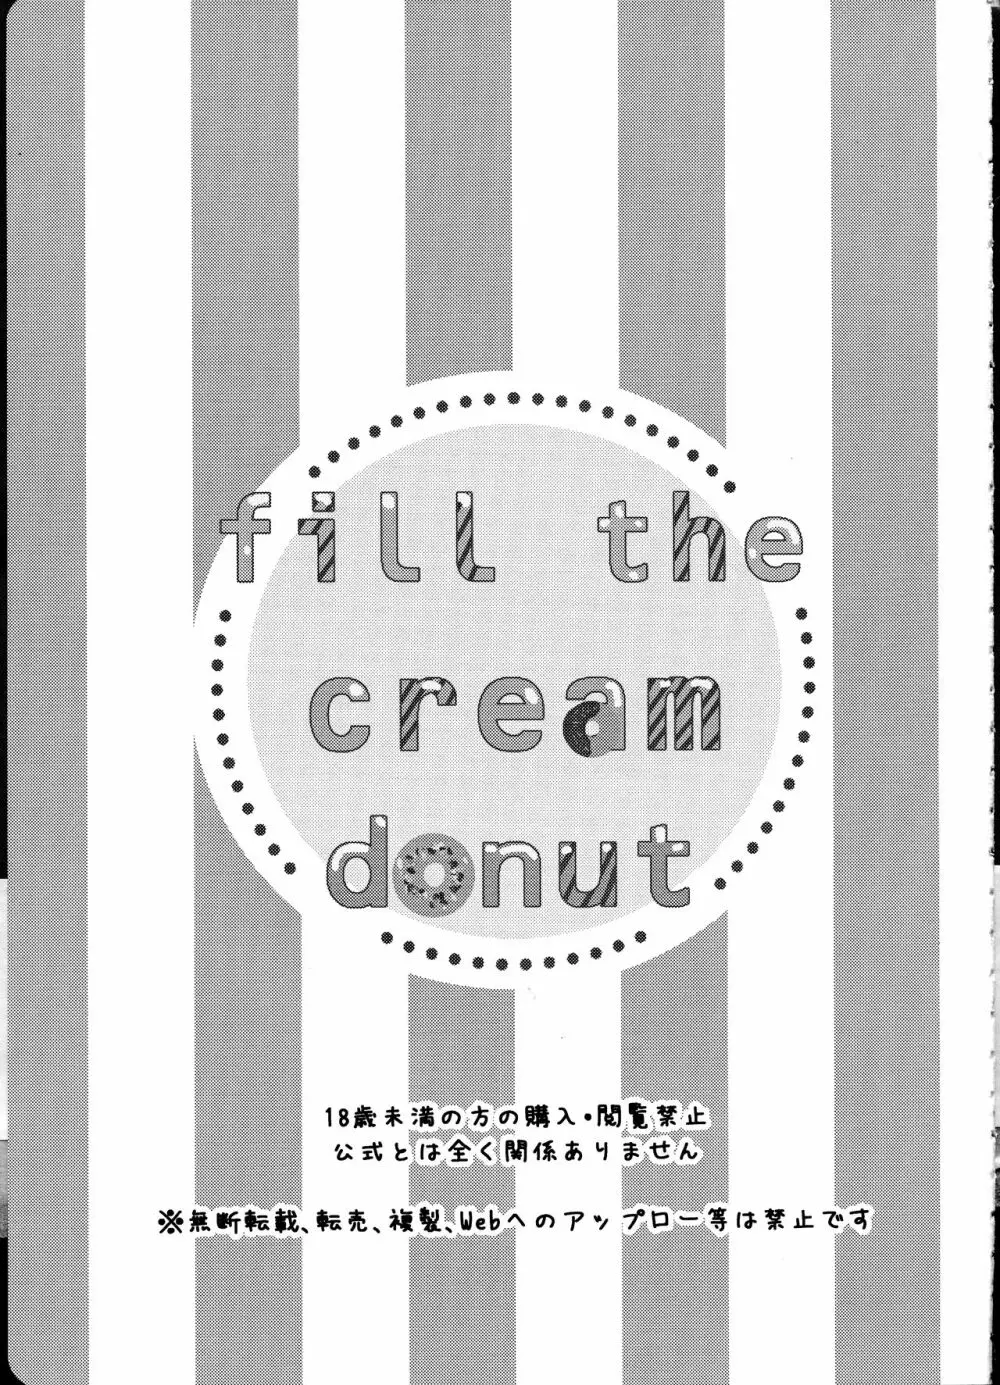 Fill the cream donut Page.2